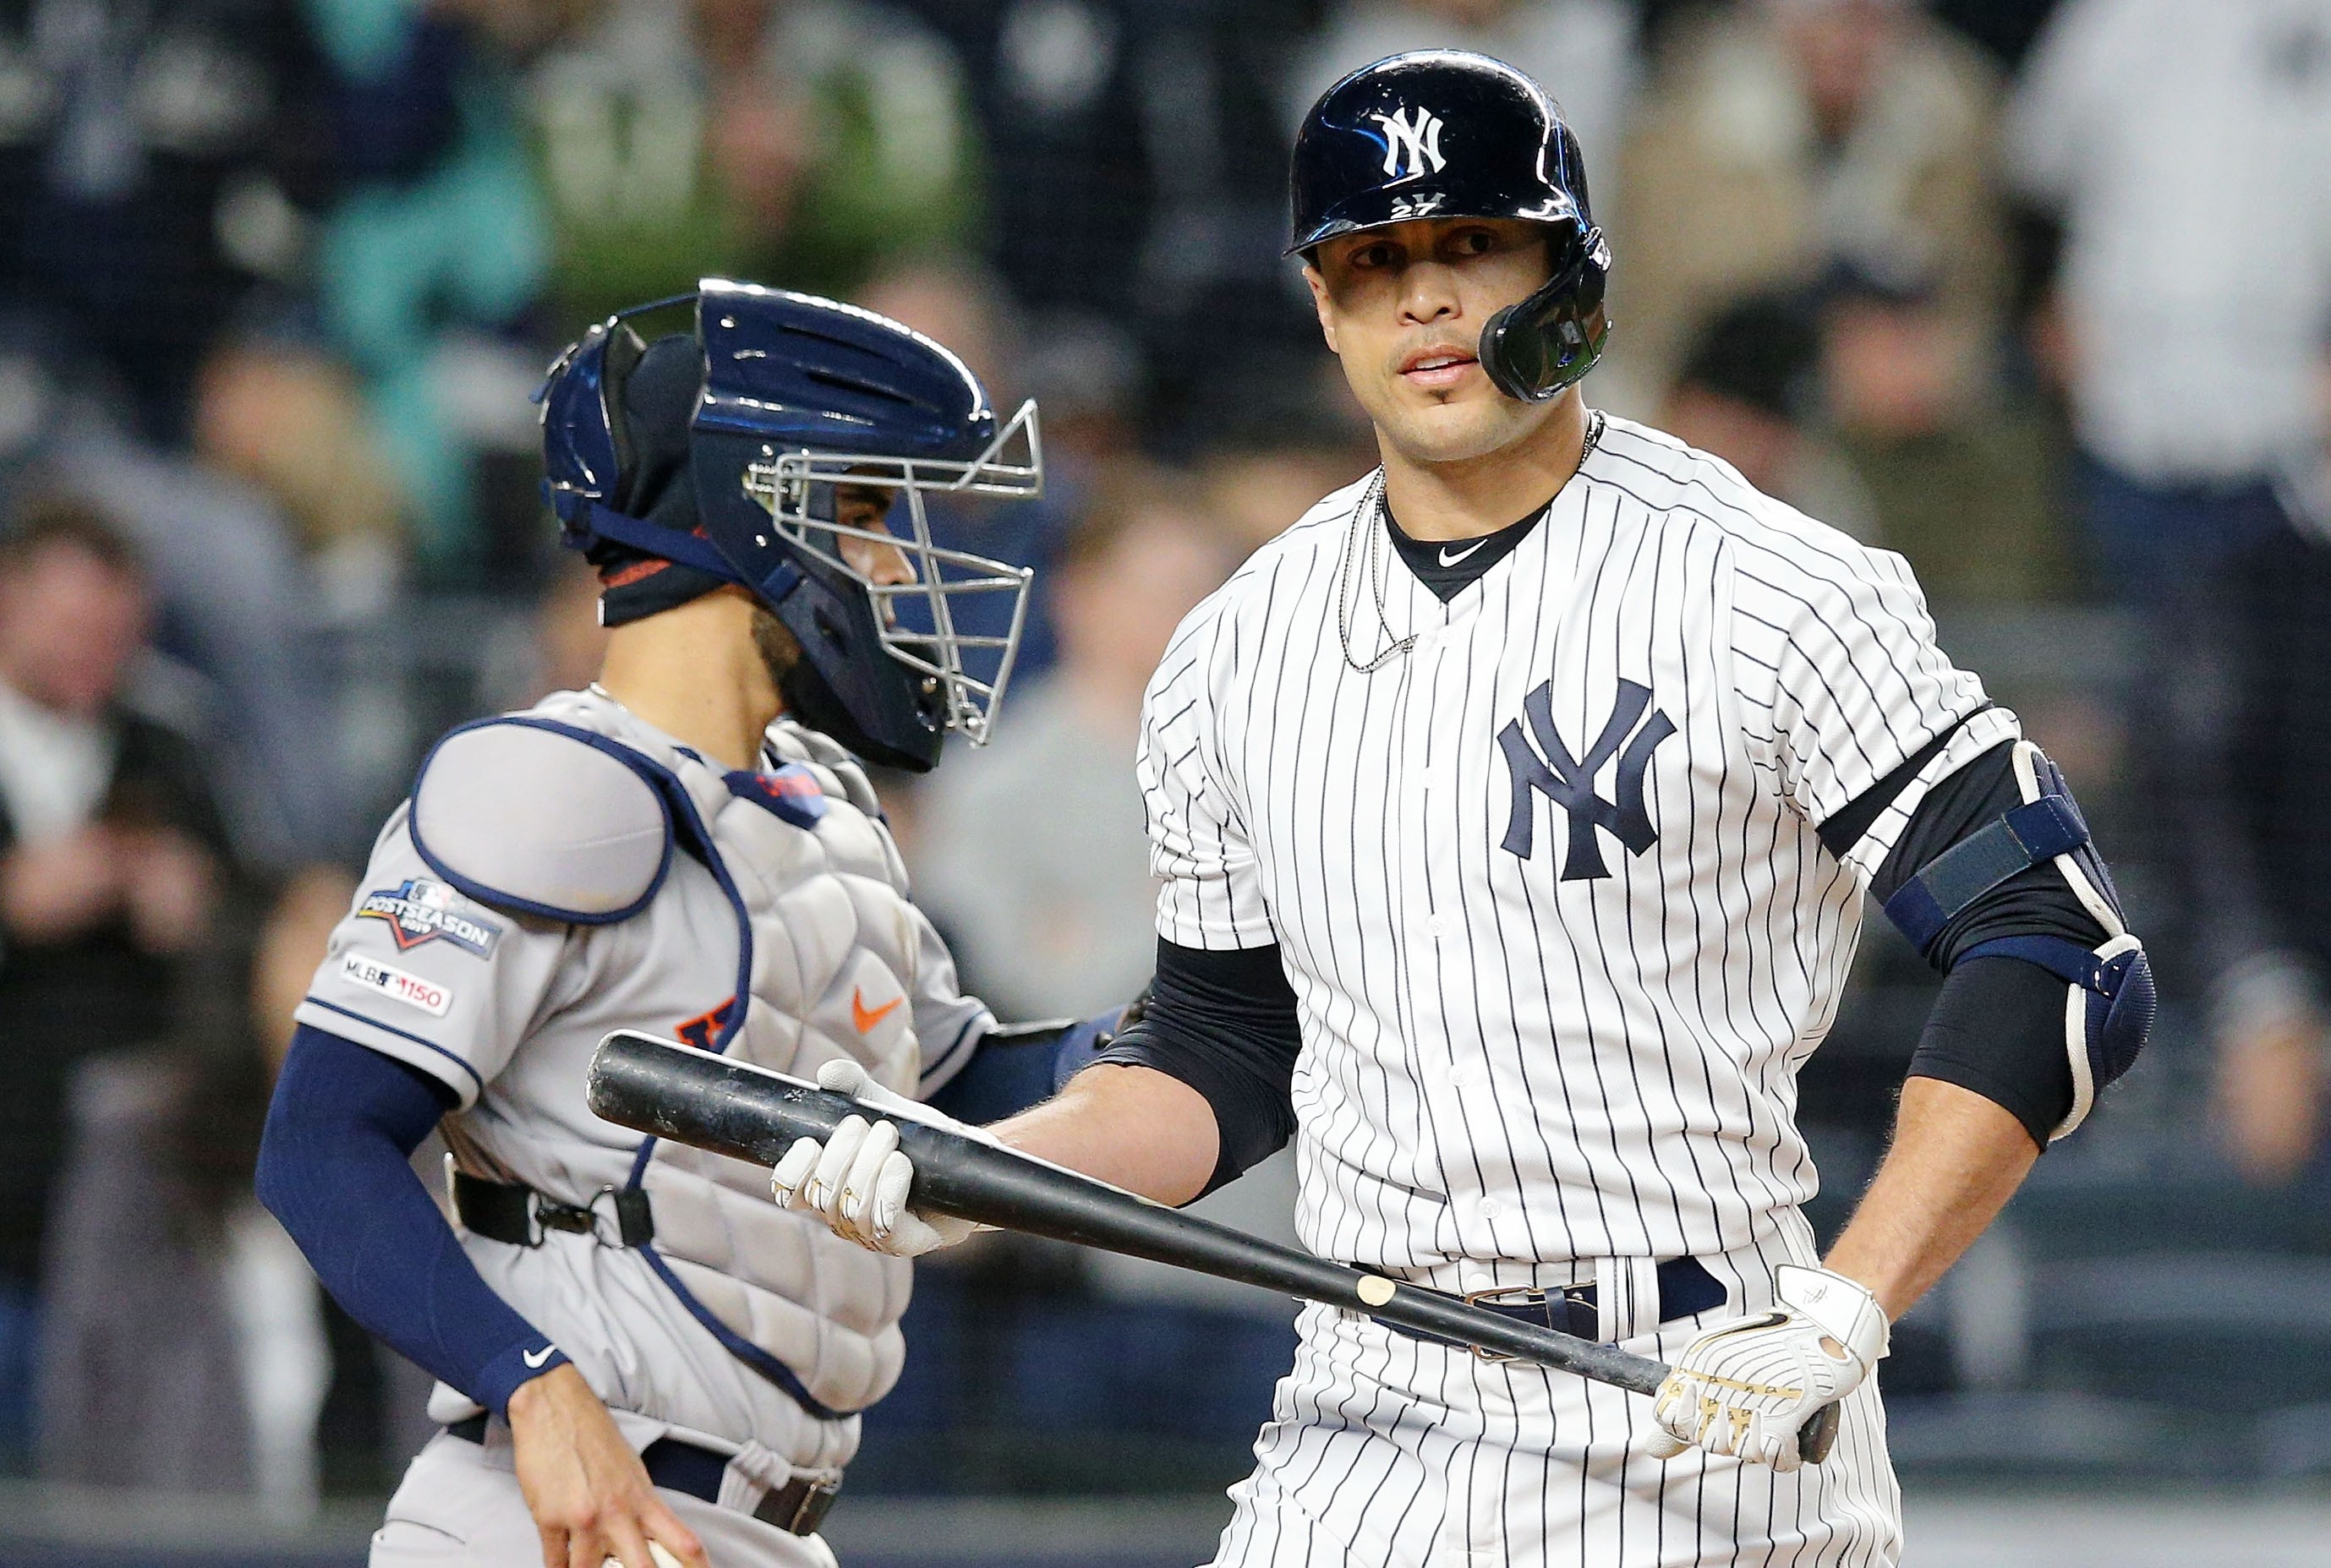 New York Yankees: Giancarlo Stanton we thought we knew ye, what happened?